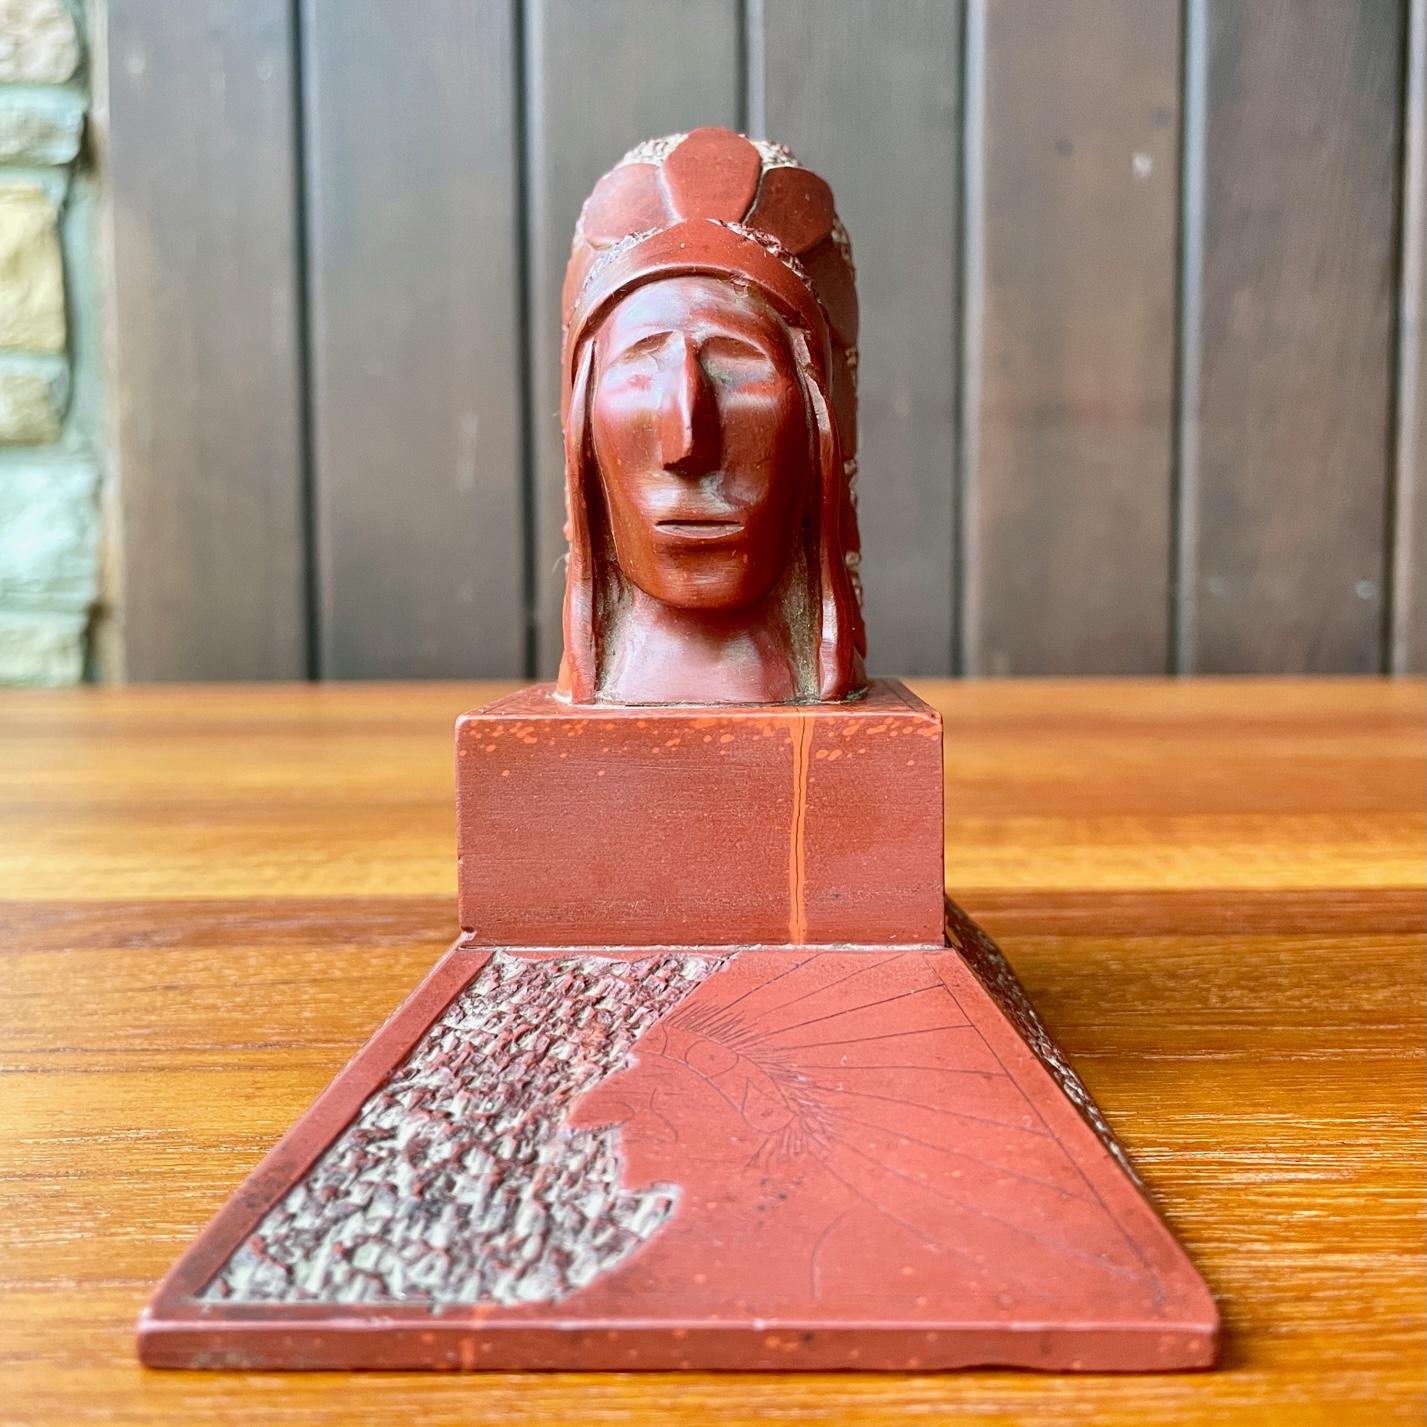 Most-likely was a route 66 touring souvenir from somewhere in the old west.  Almost geometric in its simplicity, and stylization.  Poured red stone marbilite.  Showing wear, and small hairline to first plinth, wear there is a stripe of